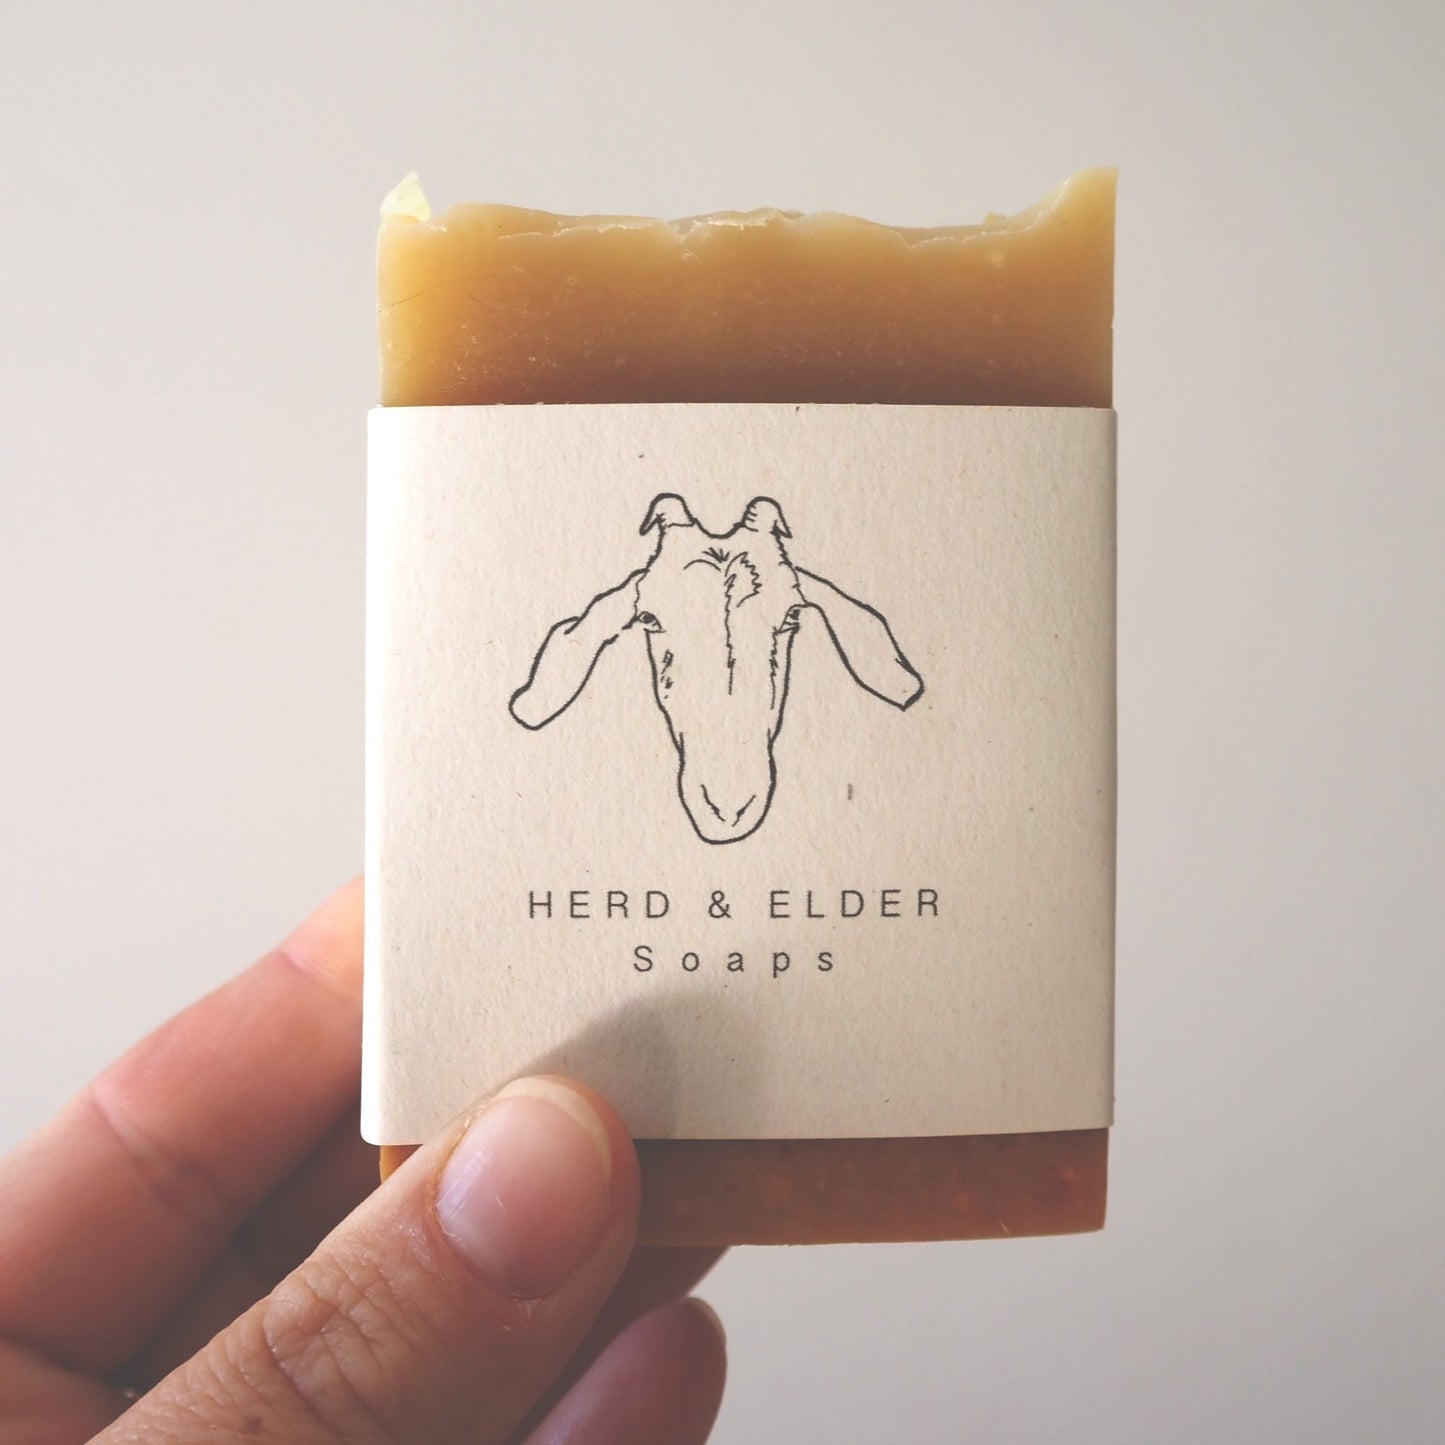 A golden soap with the herd and elder soaps branding belly band around the middle. The soap is being held up in front of a white background,